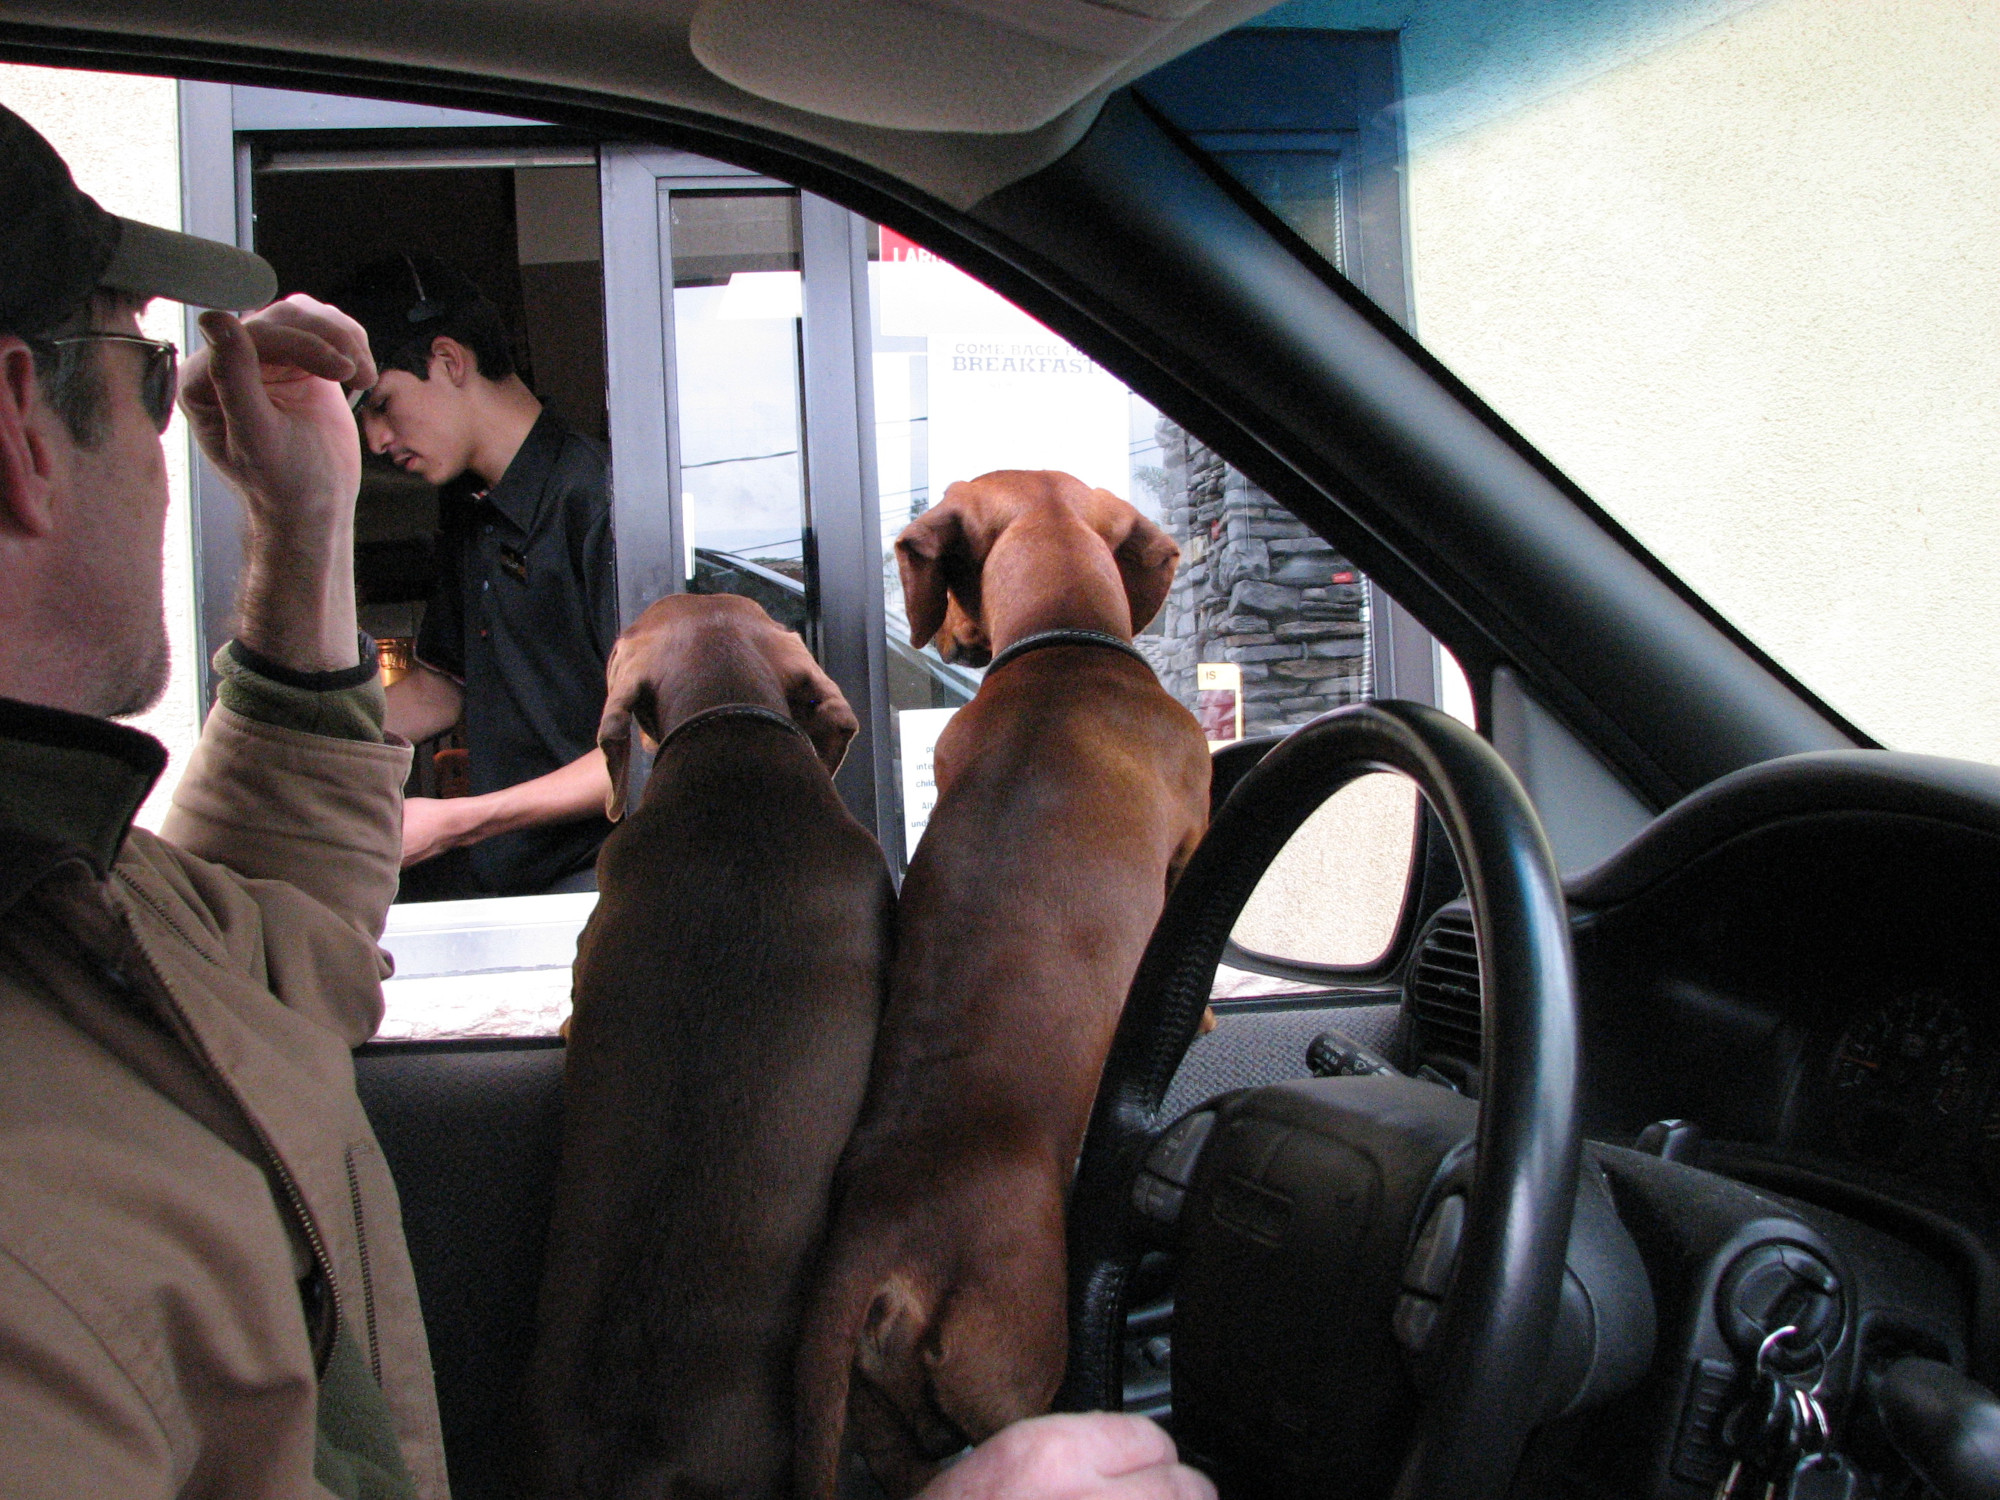 Two dachshunds leaning out a car window at a hamburger drive-thru